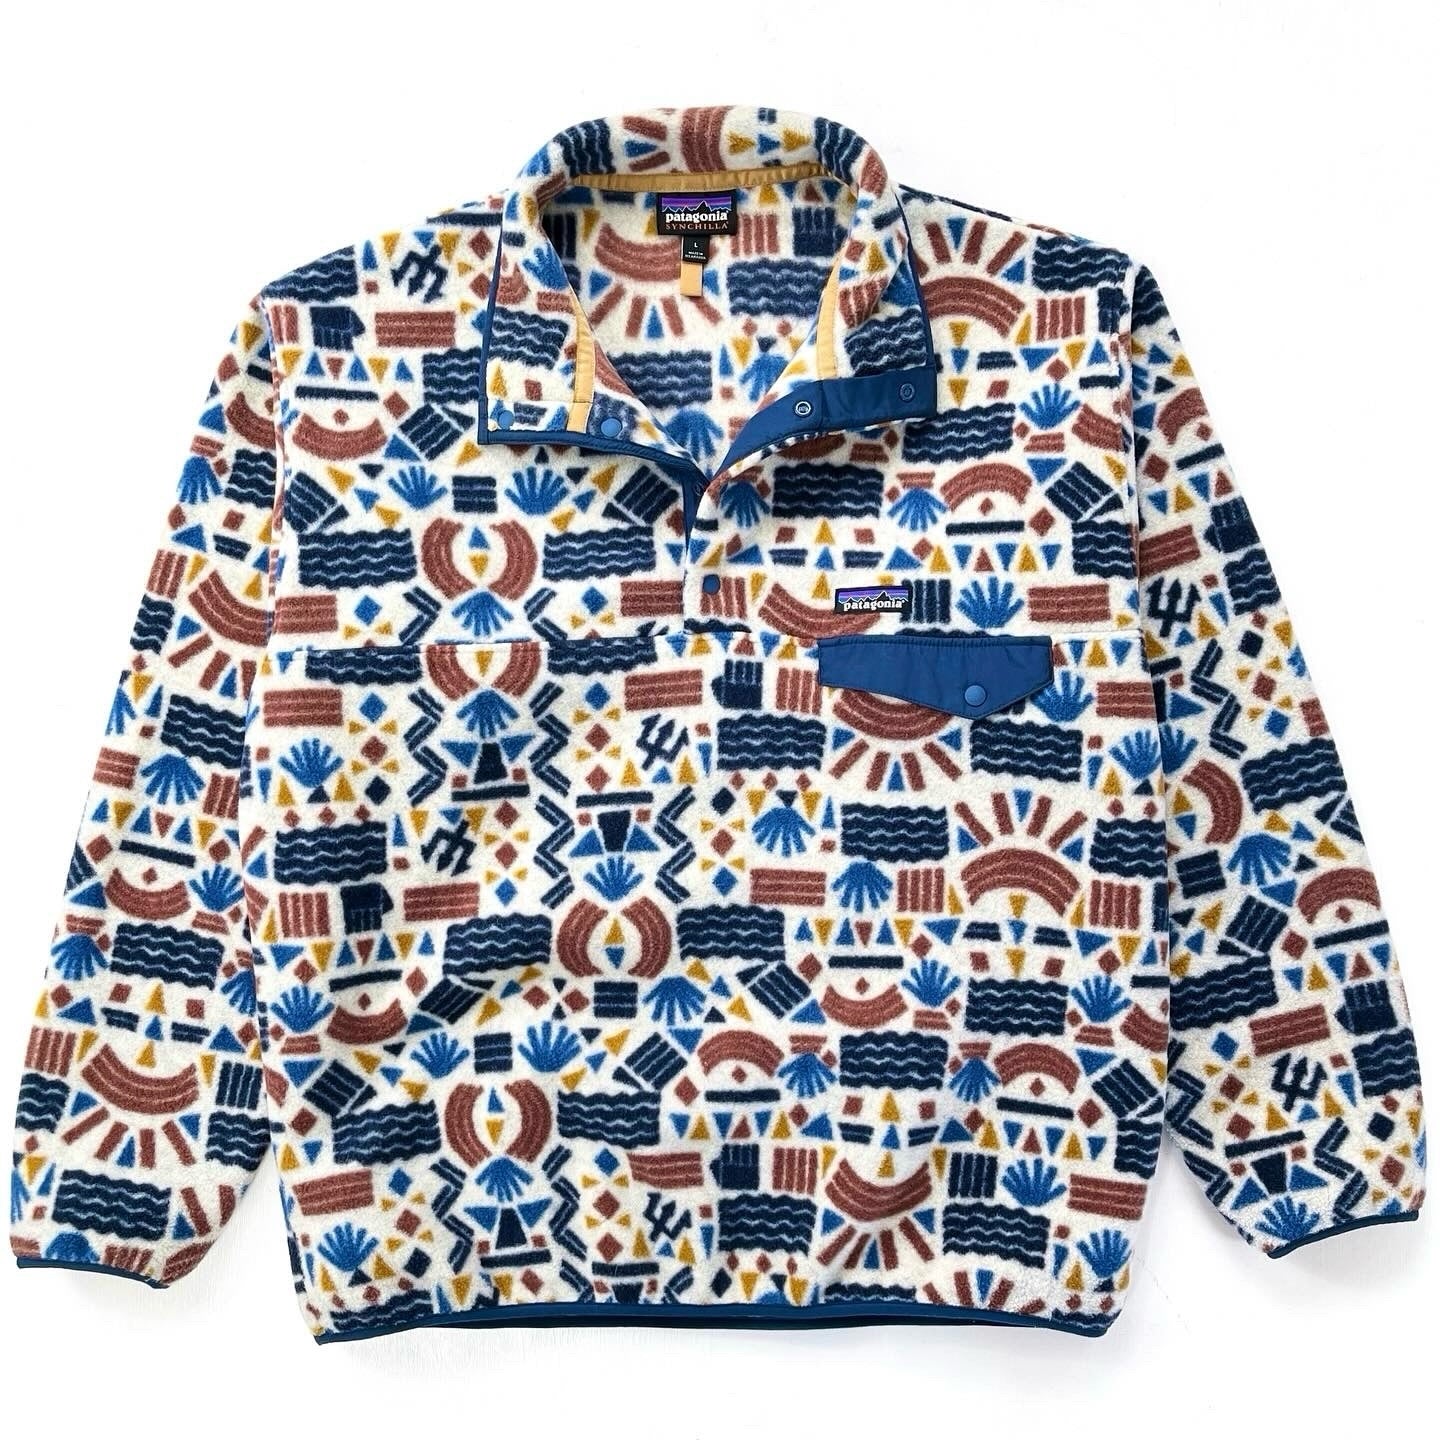 2019 Patagonia Printed Synchilla Snap-T, Protected Peaks: Multi (L)